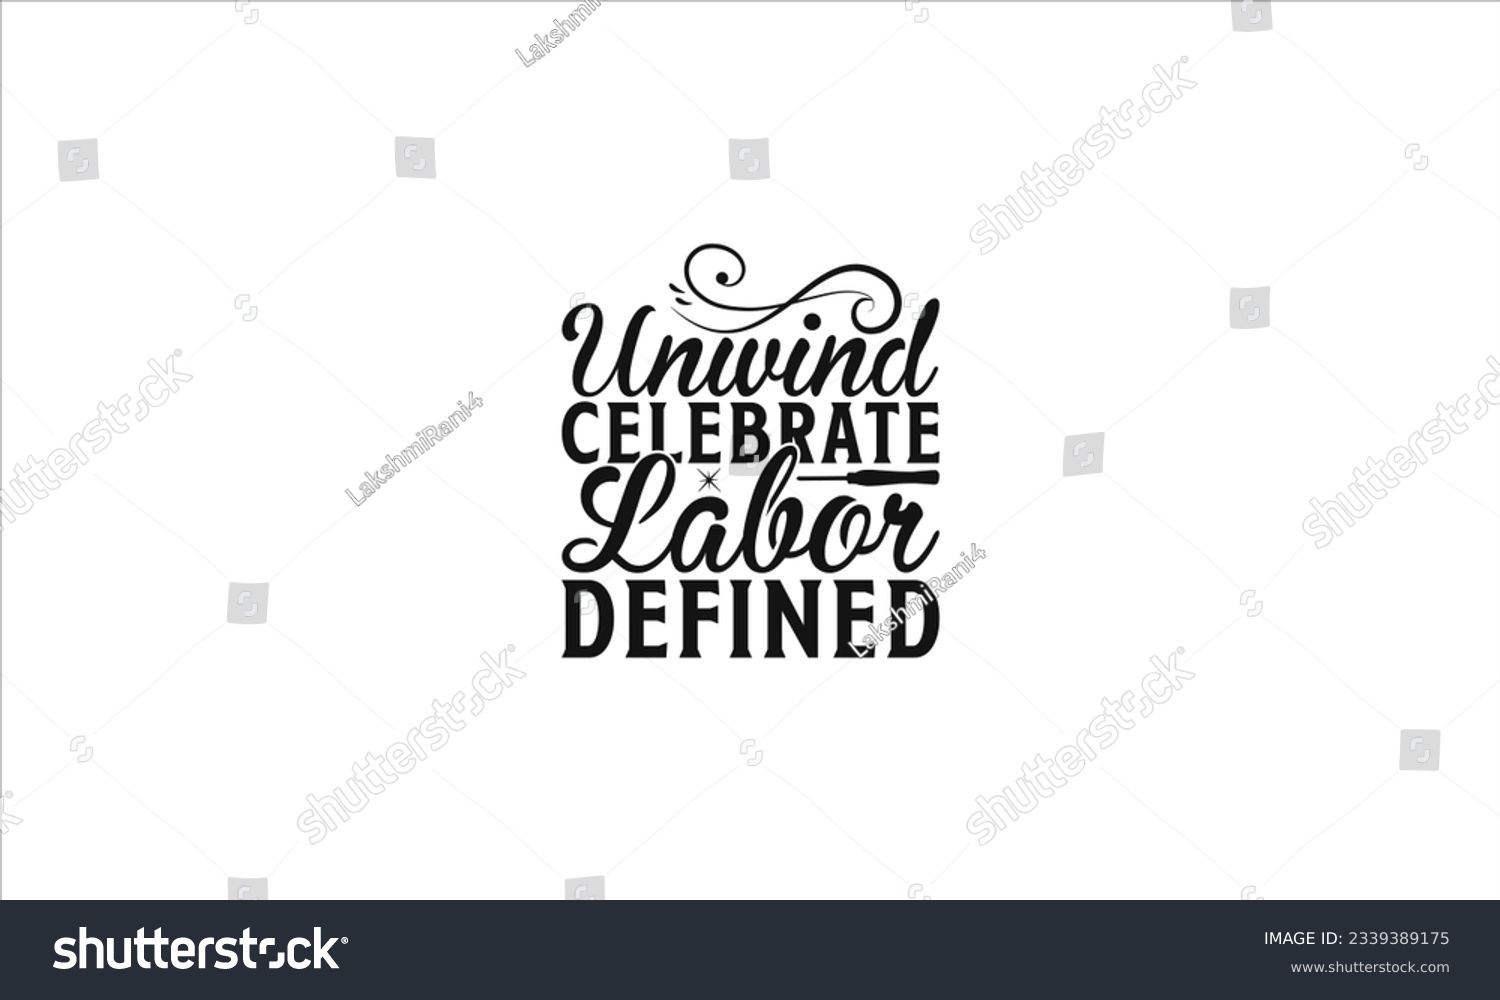 SVG of  Unwind Celebrate Labor Defined -  Lettering design for greeting banners, Mouse Pads, Prints, Cards and Posters, Mugs, Notebooks, Floor Pillows and T-shirt prints design.
 svg